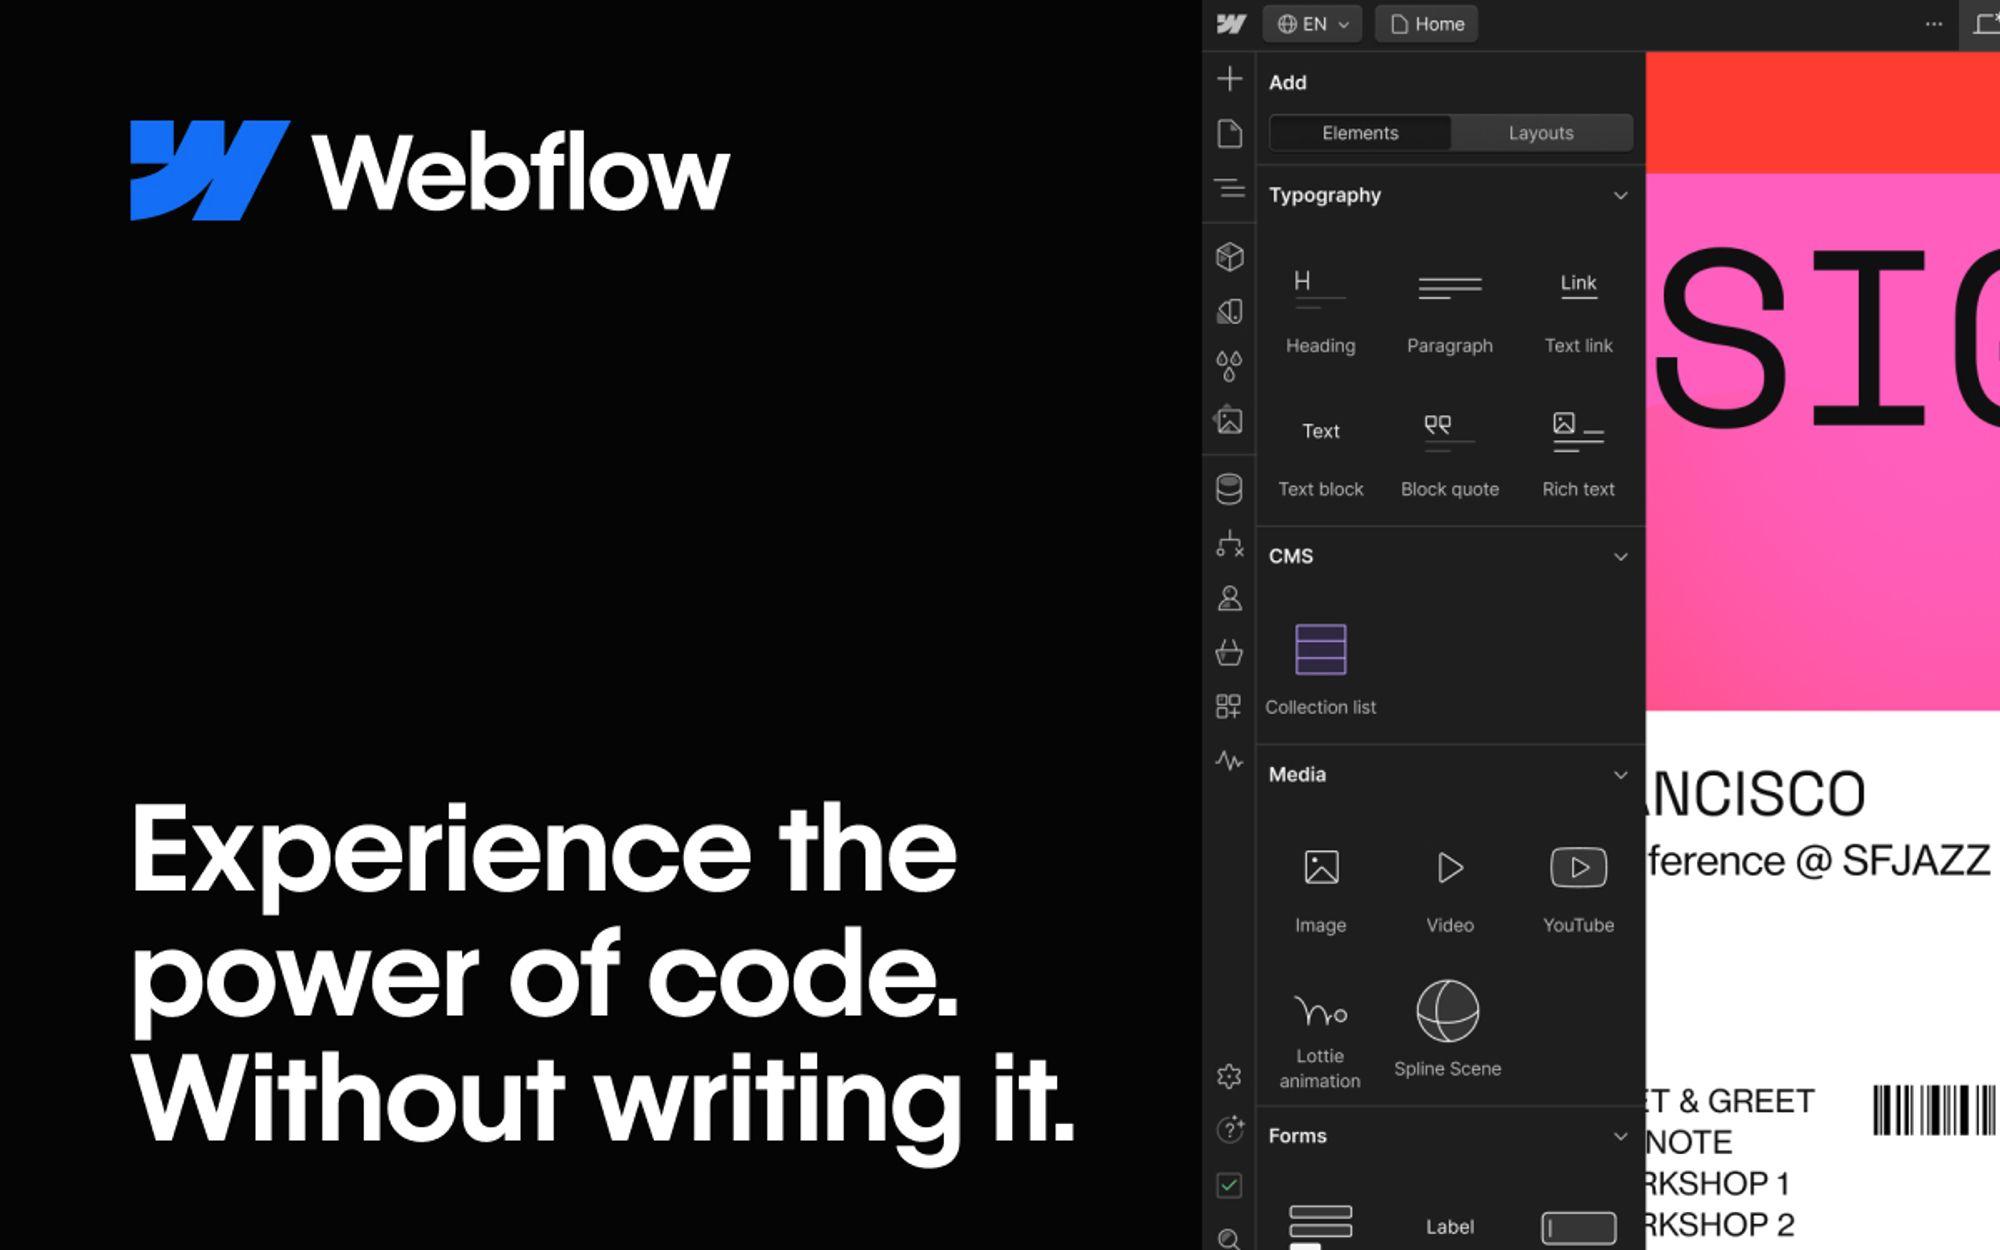 Bring your designs to life with Webflow